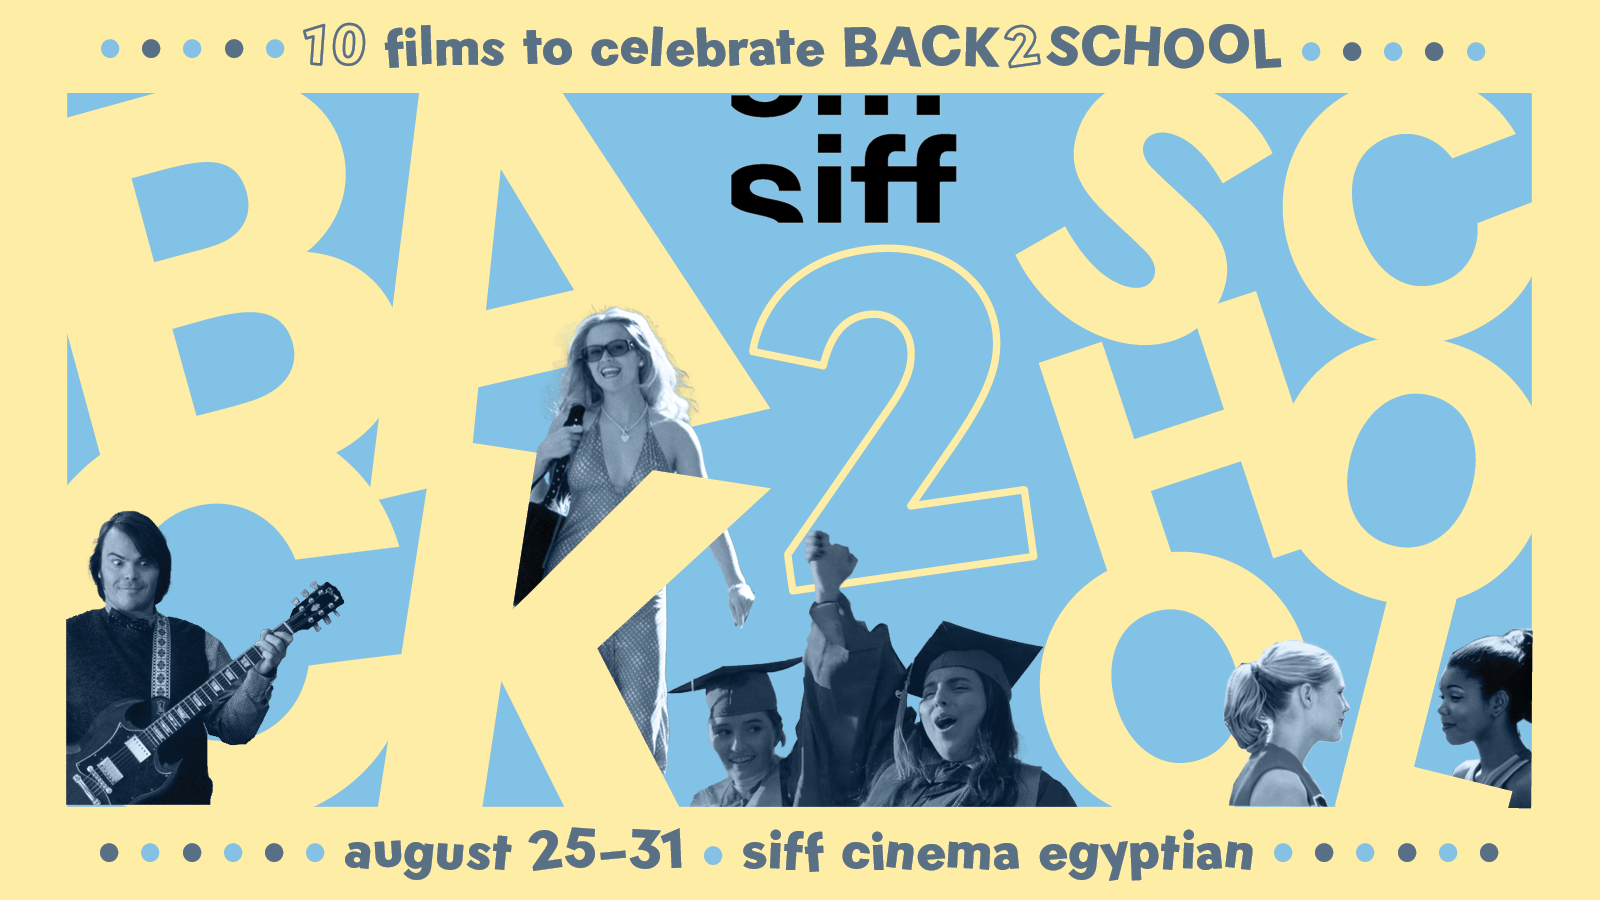 Back2School Series at SIFF, 10 Films being shown at the Egyptian from Aug 25-31